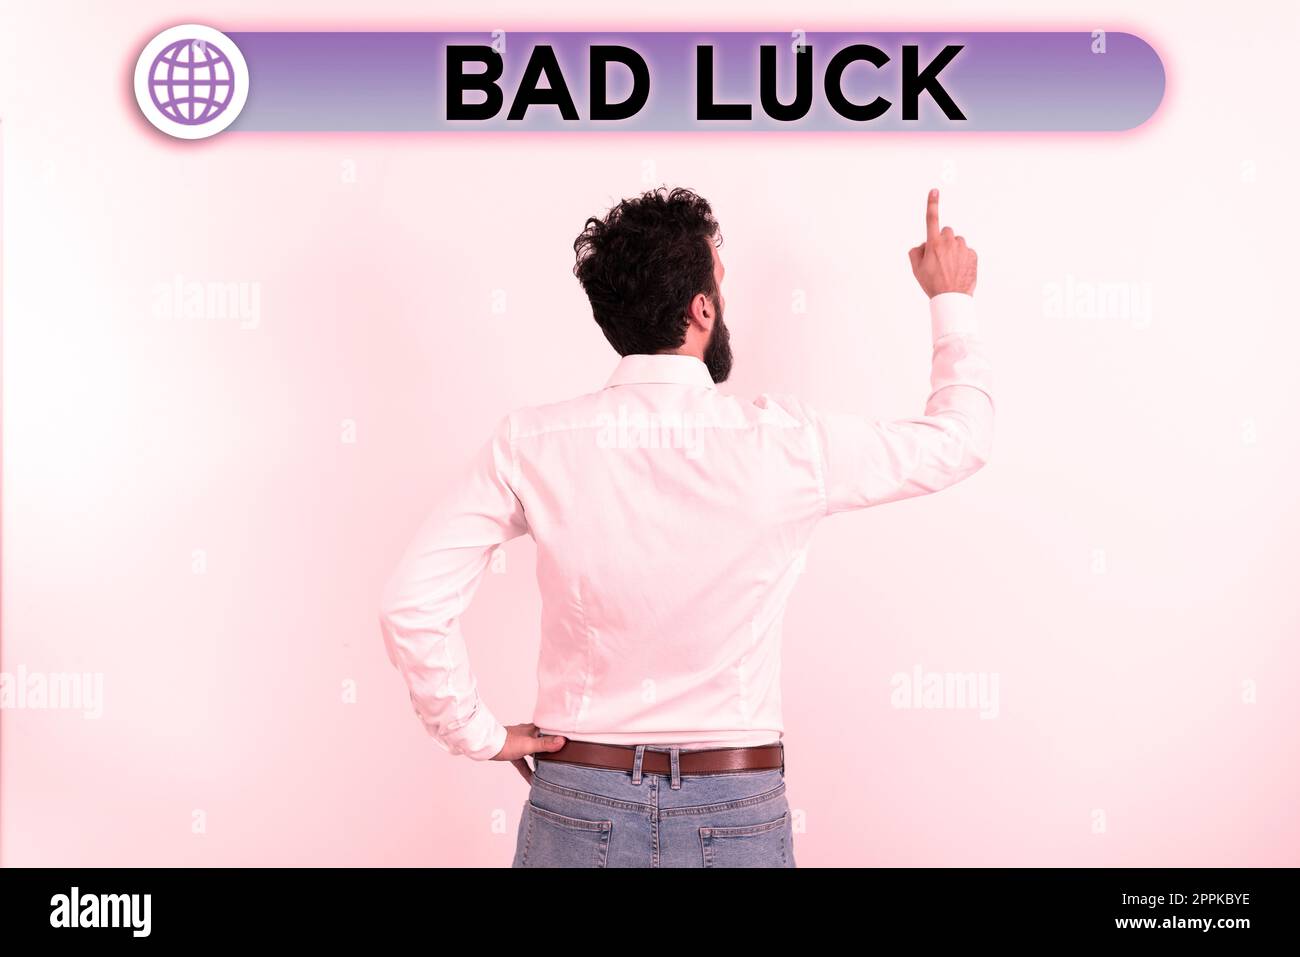 Text showing inspiration Bad Luck. Internet Concept an unfortunate state resulting from unfavorable outcomes Mischance Stock Photo